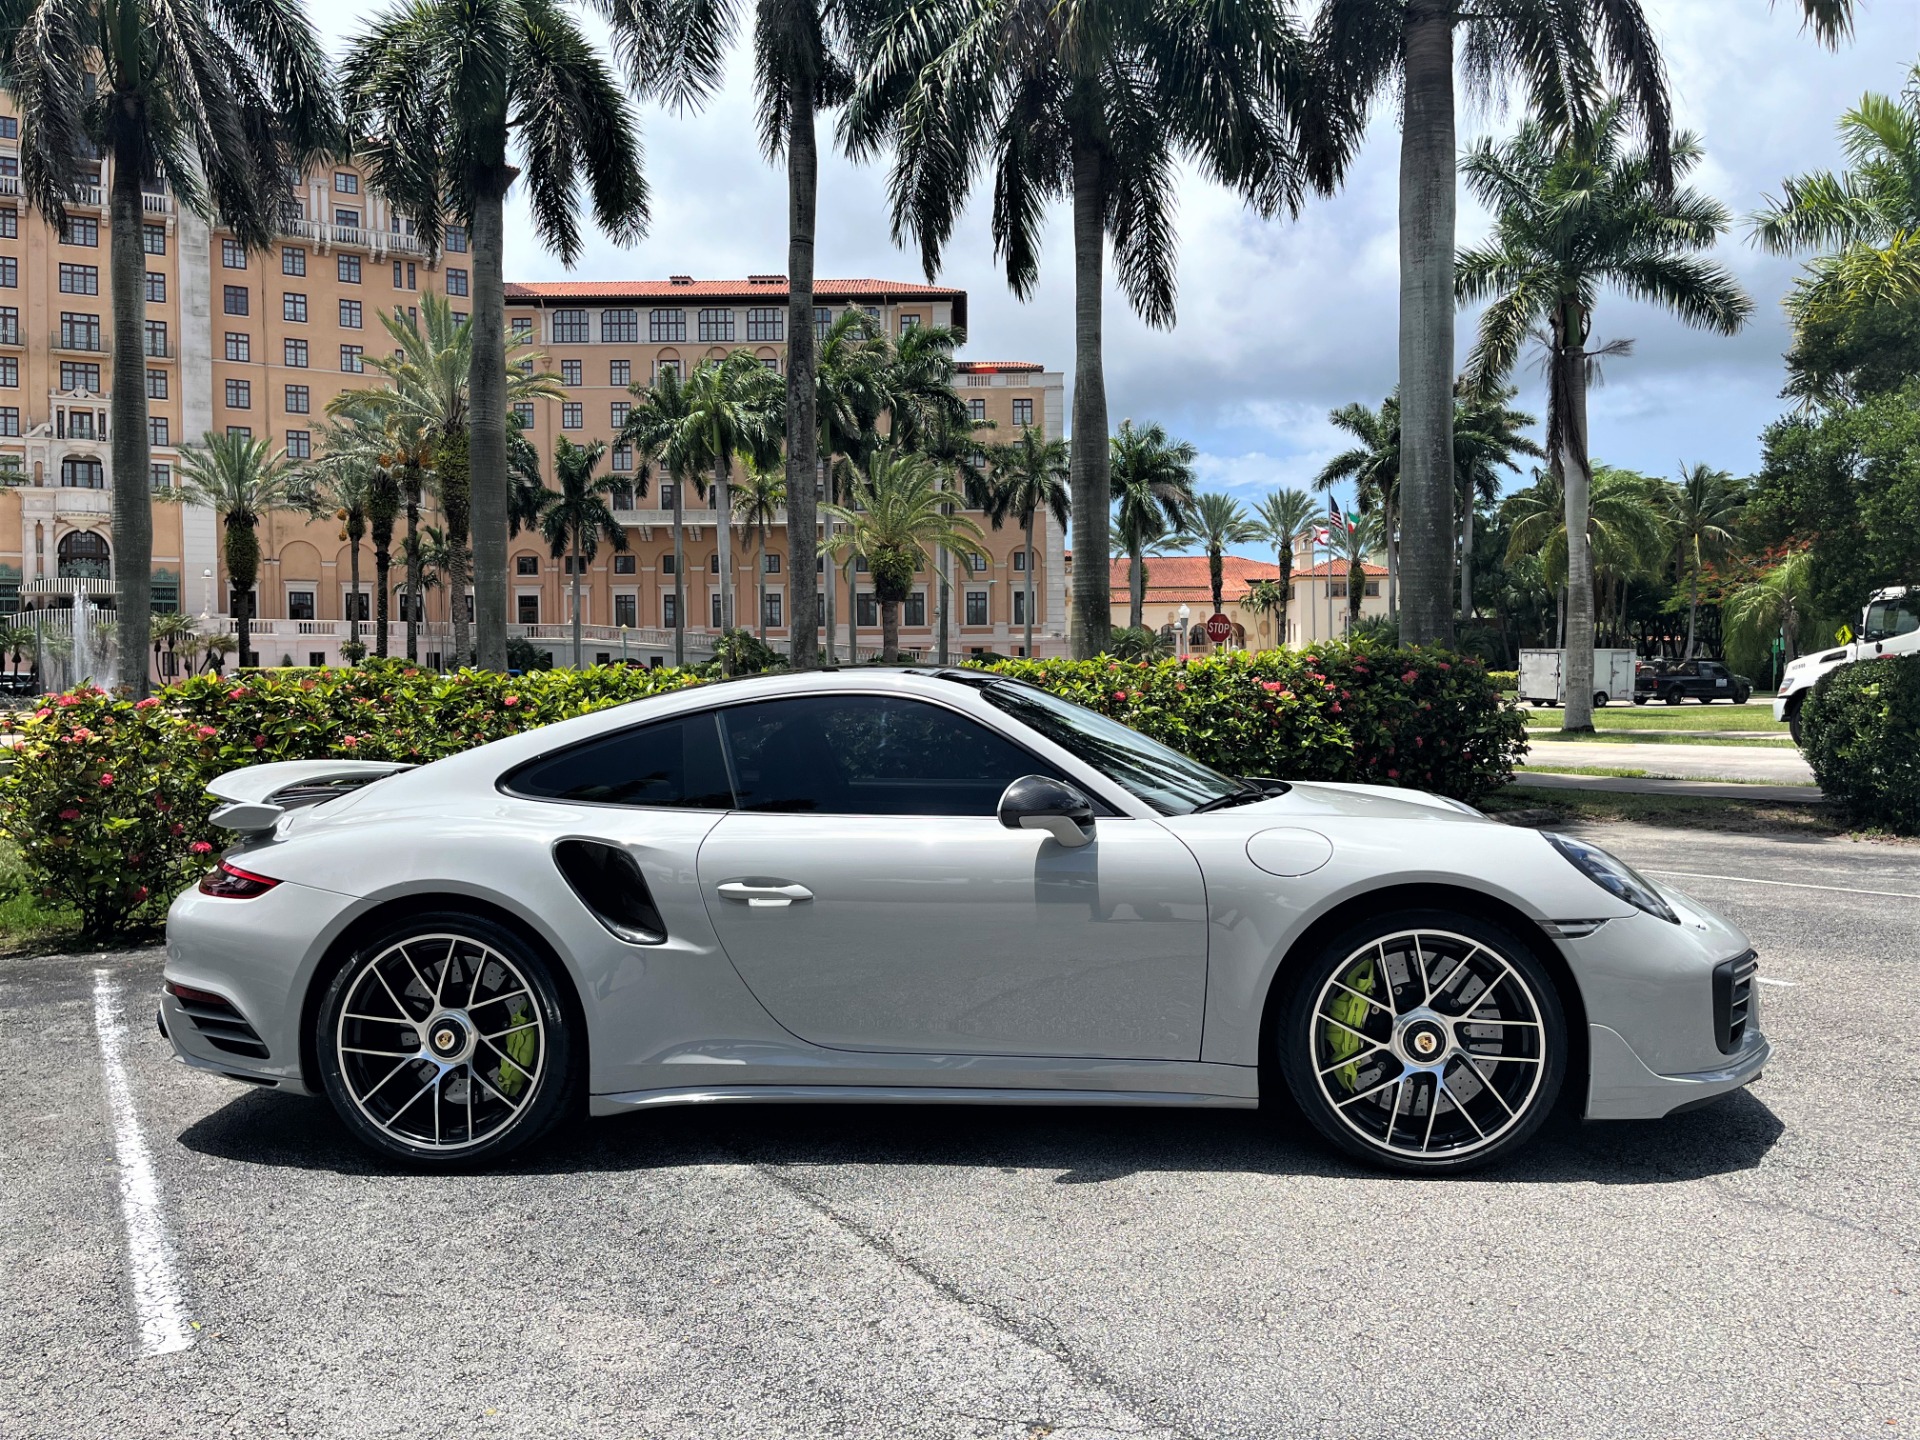 Used 2018 Porsche 911 Turbo S for sale Sold at The Gables Sports Cars in Miami FL 33146 3